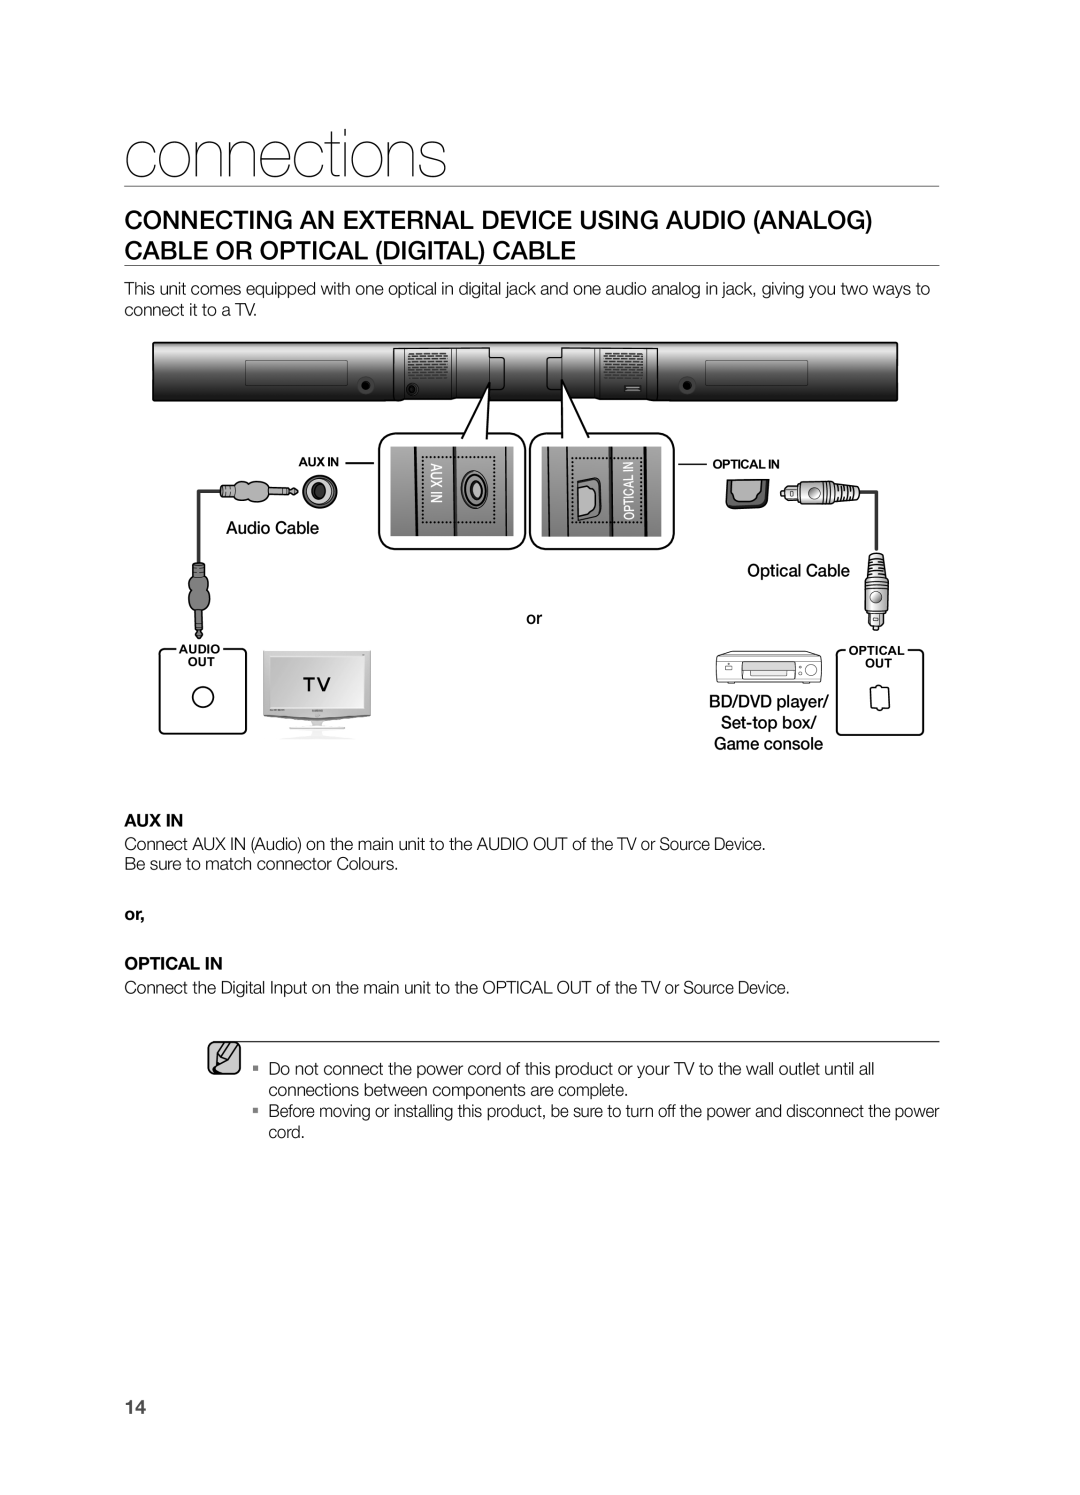 Samsung HW-FM55C user manual connections, Aux In, or OPTICAL IN 